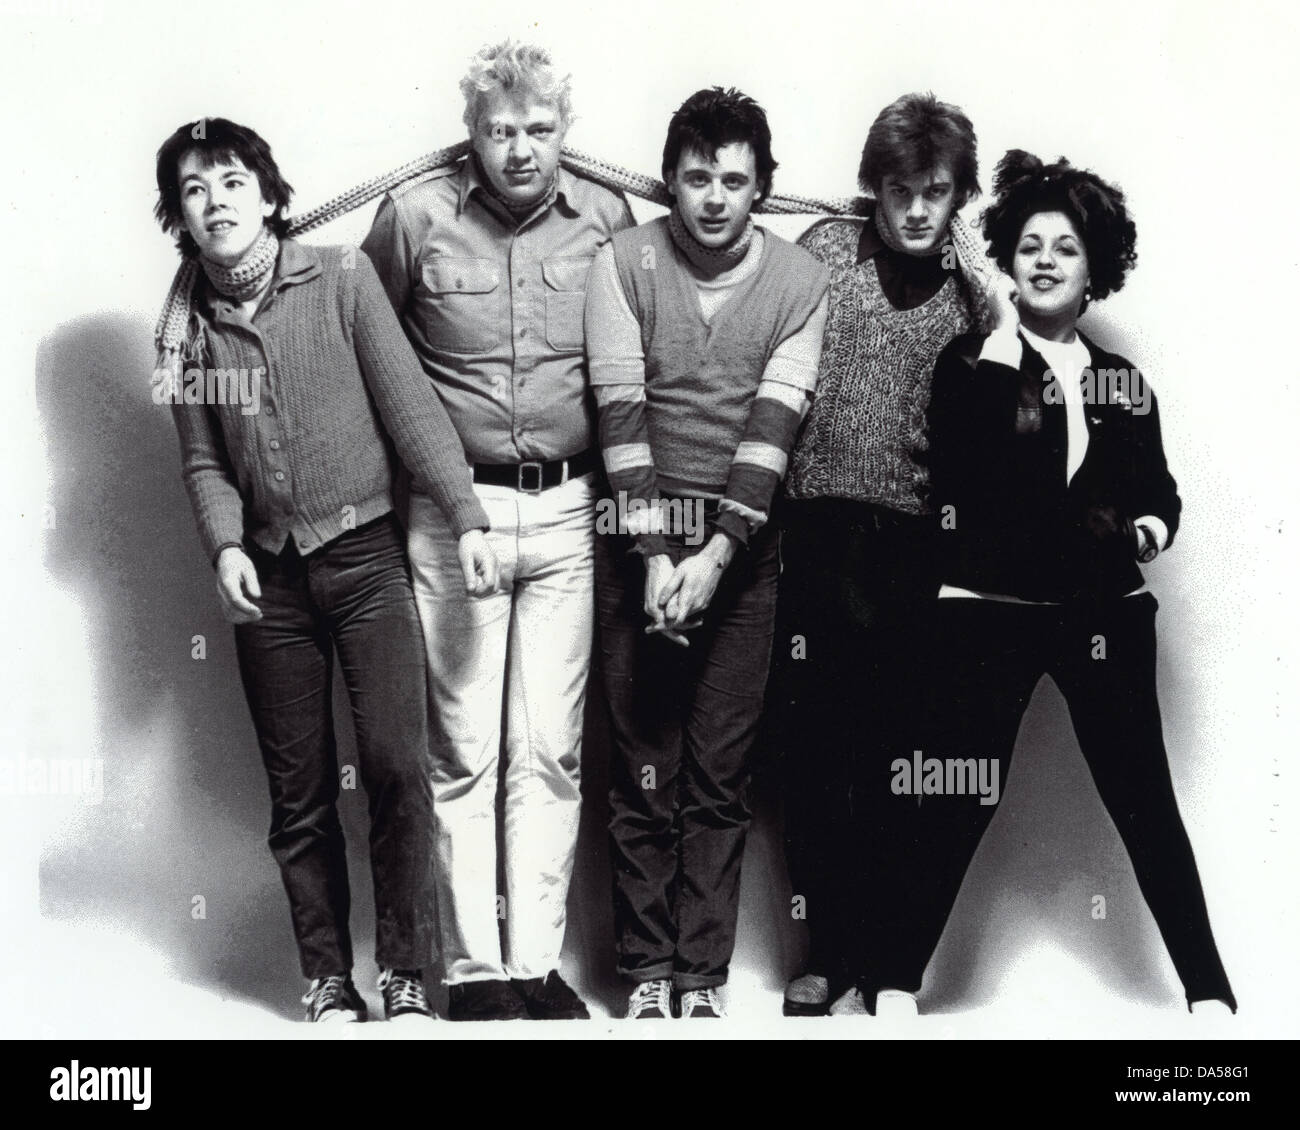 X-RAY SPEX Promotional photo of English punk group with Poly Styrene at right Stock Photo